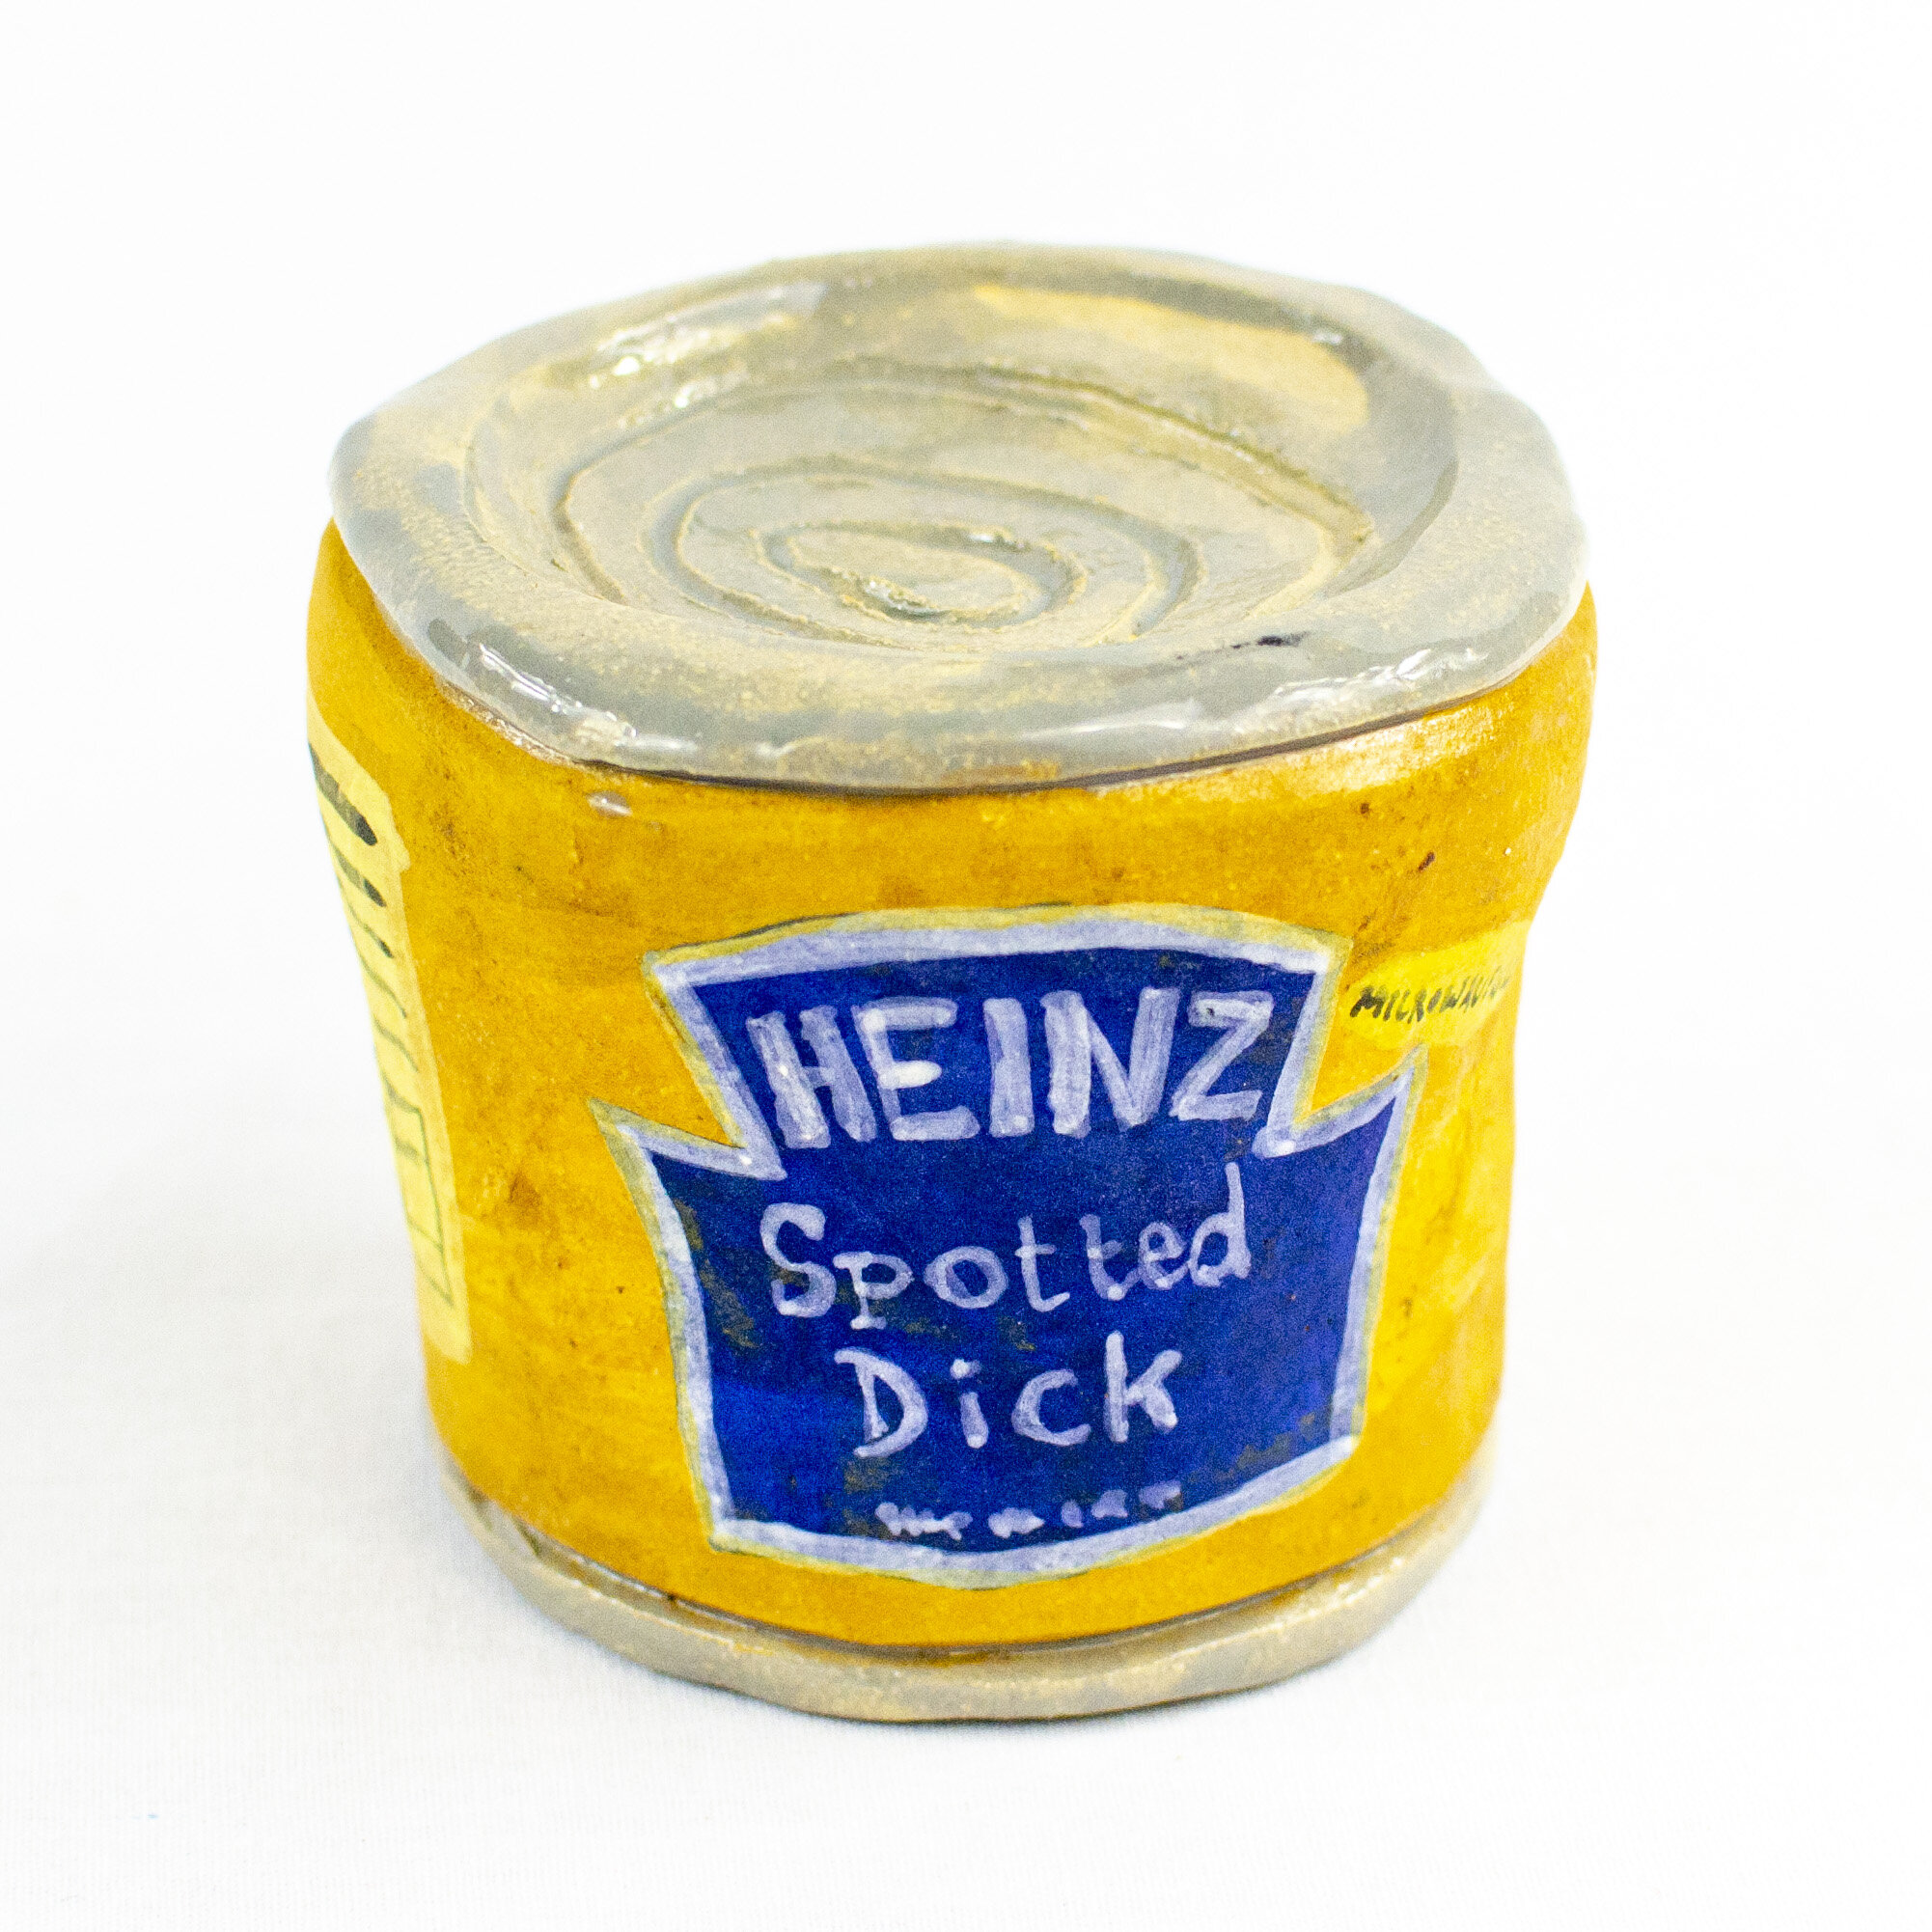 Spotted Dick.JPG